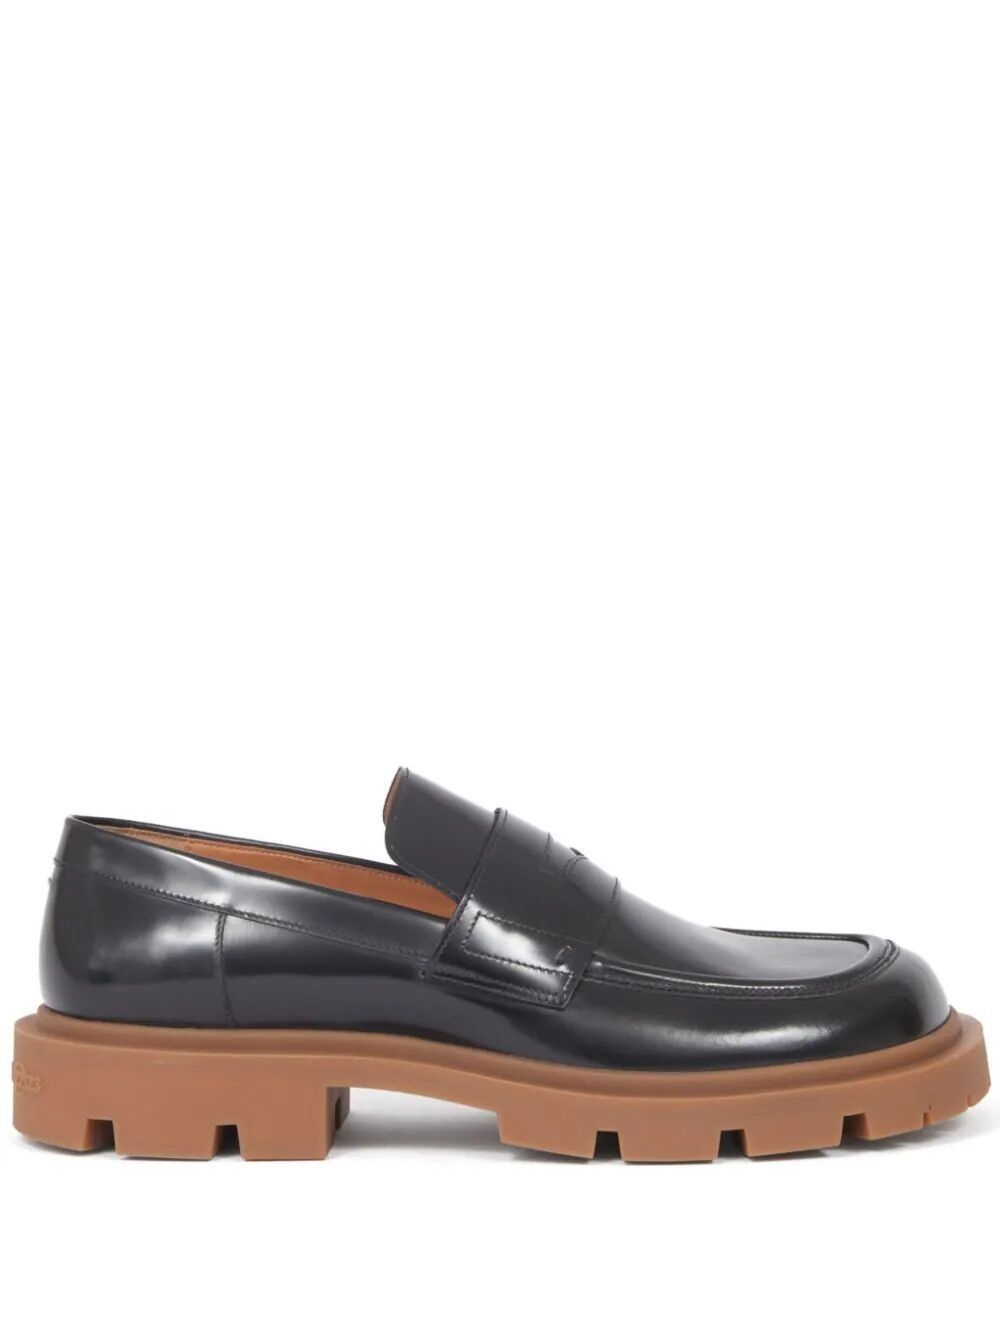 IVY LOAFERS - 1